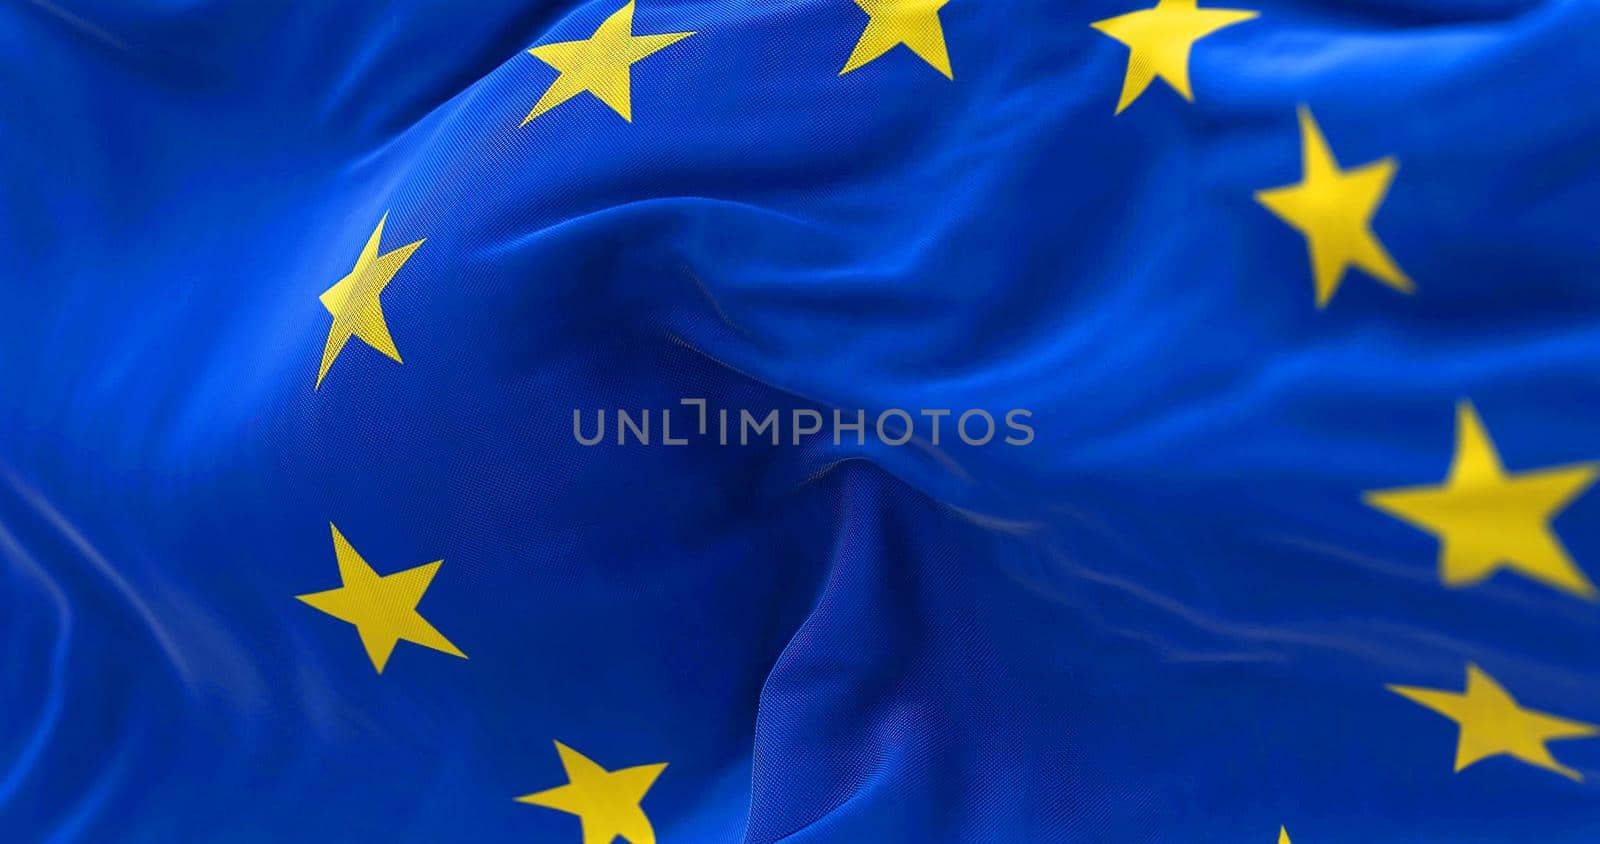 Close-up view of the European Union flag waving in the wind by rarrarorro